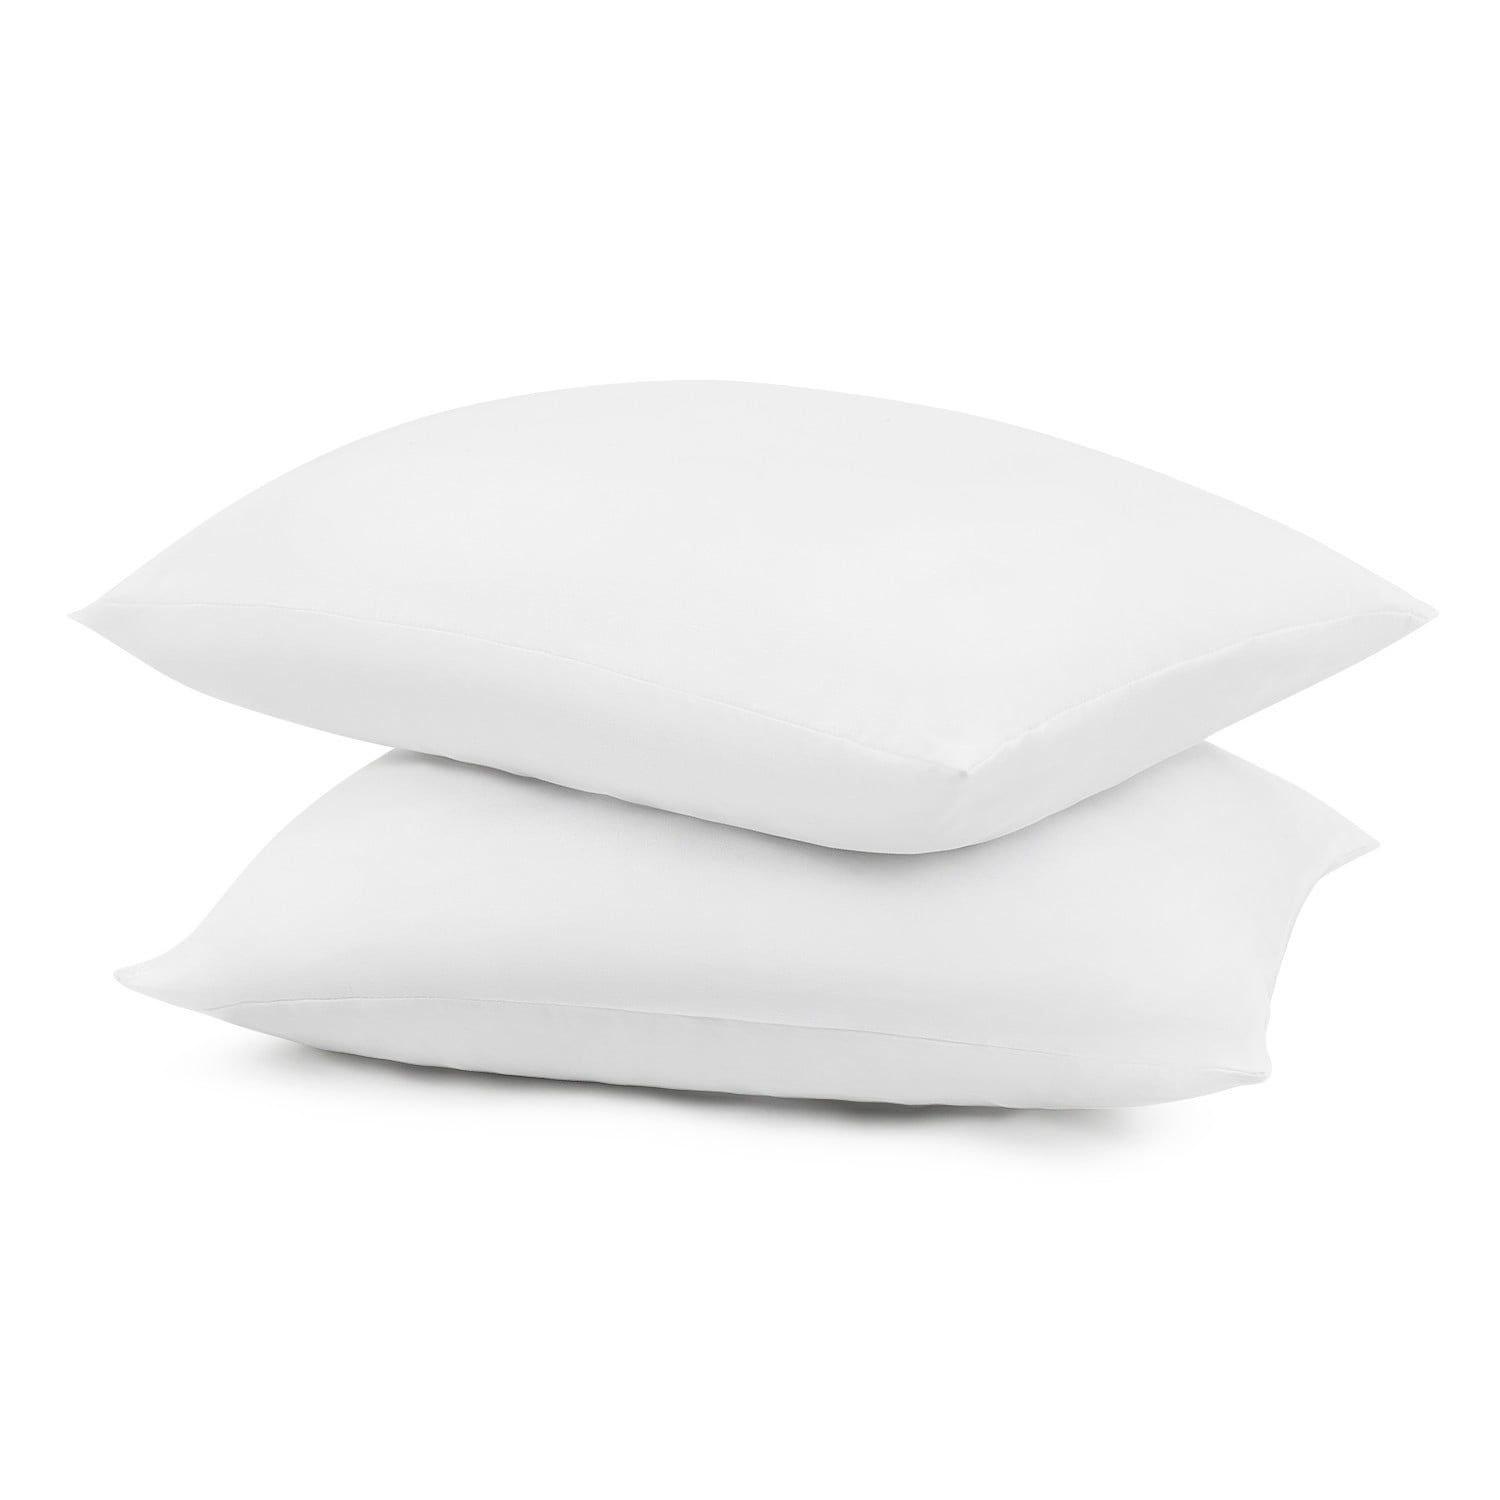 TSUTOMI 18 x 18 Pillow Insert Set of 2 for Pillow Stuffing, Decorative  Pillows for Bed, 18x18 Pillow Fillers and Down Lumbar Pillow Insert, Square